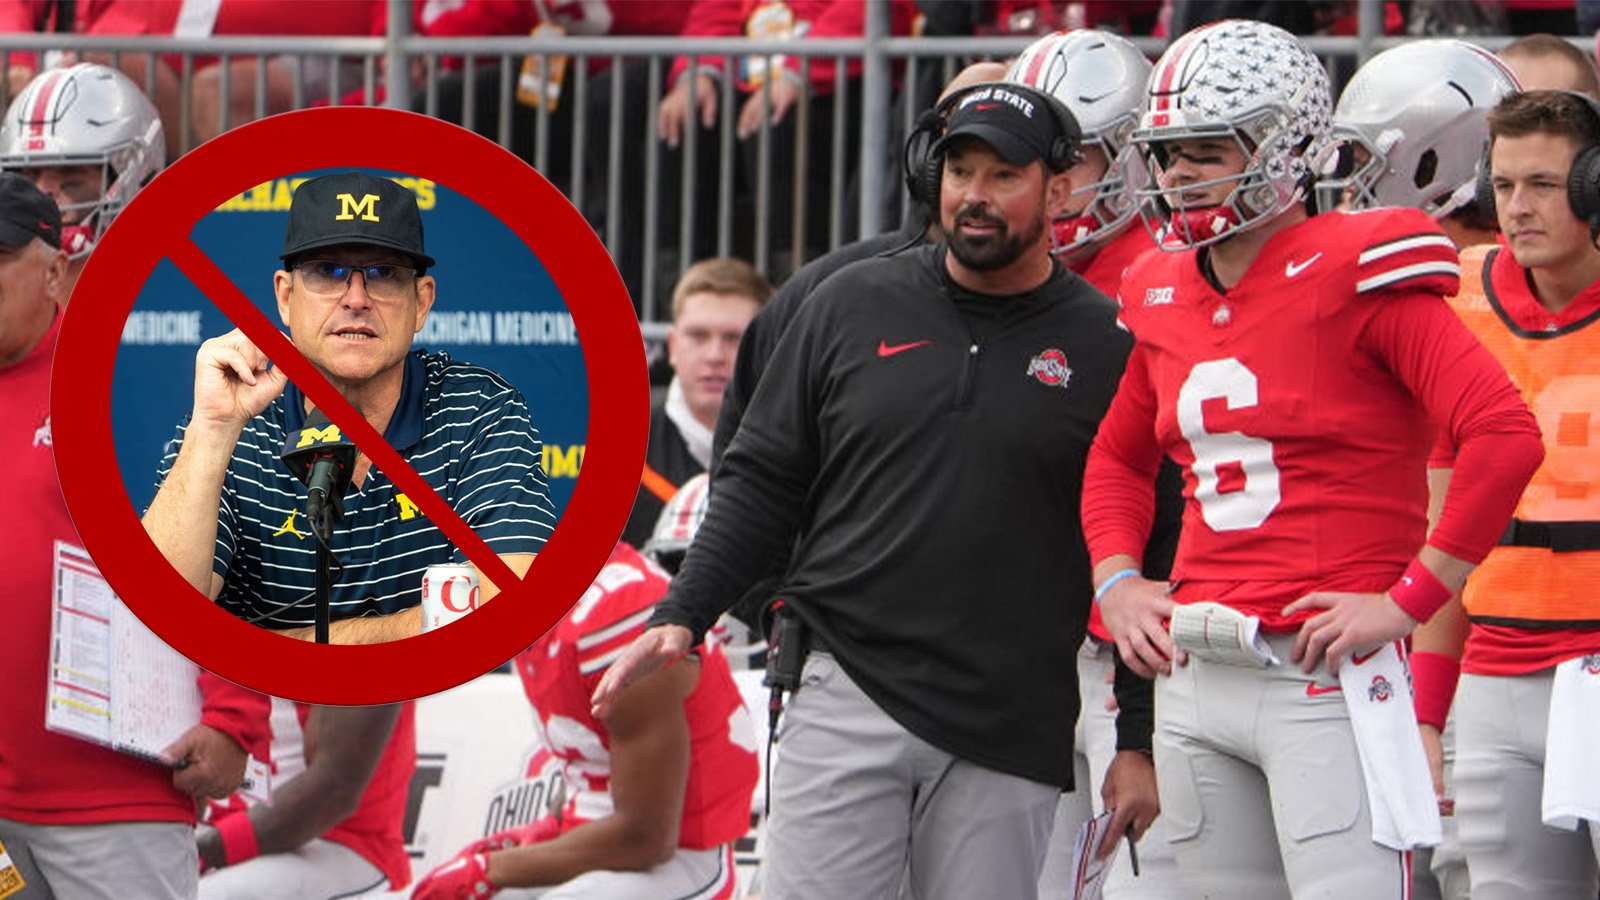 Ohio State Gets Petty By Going WAY Over The Top To Prevent Michigan From Stealing Signs